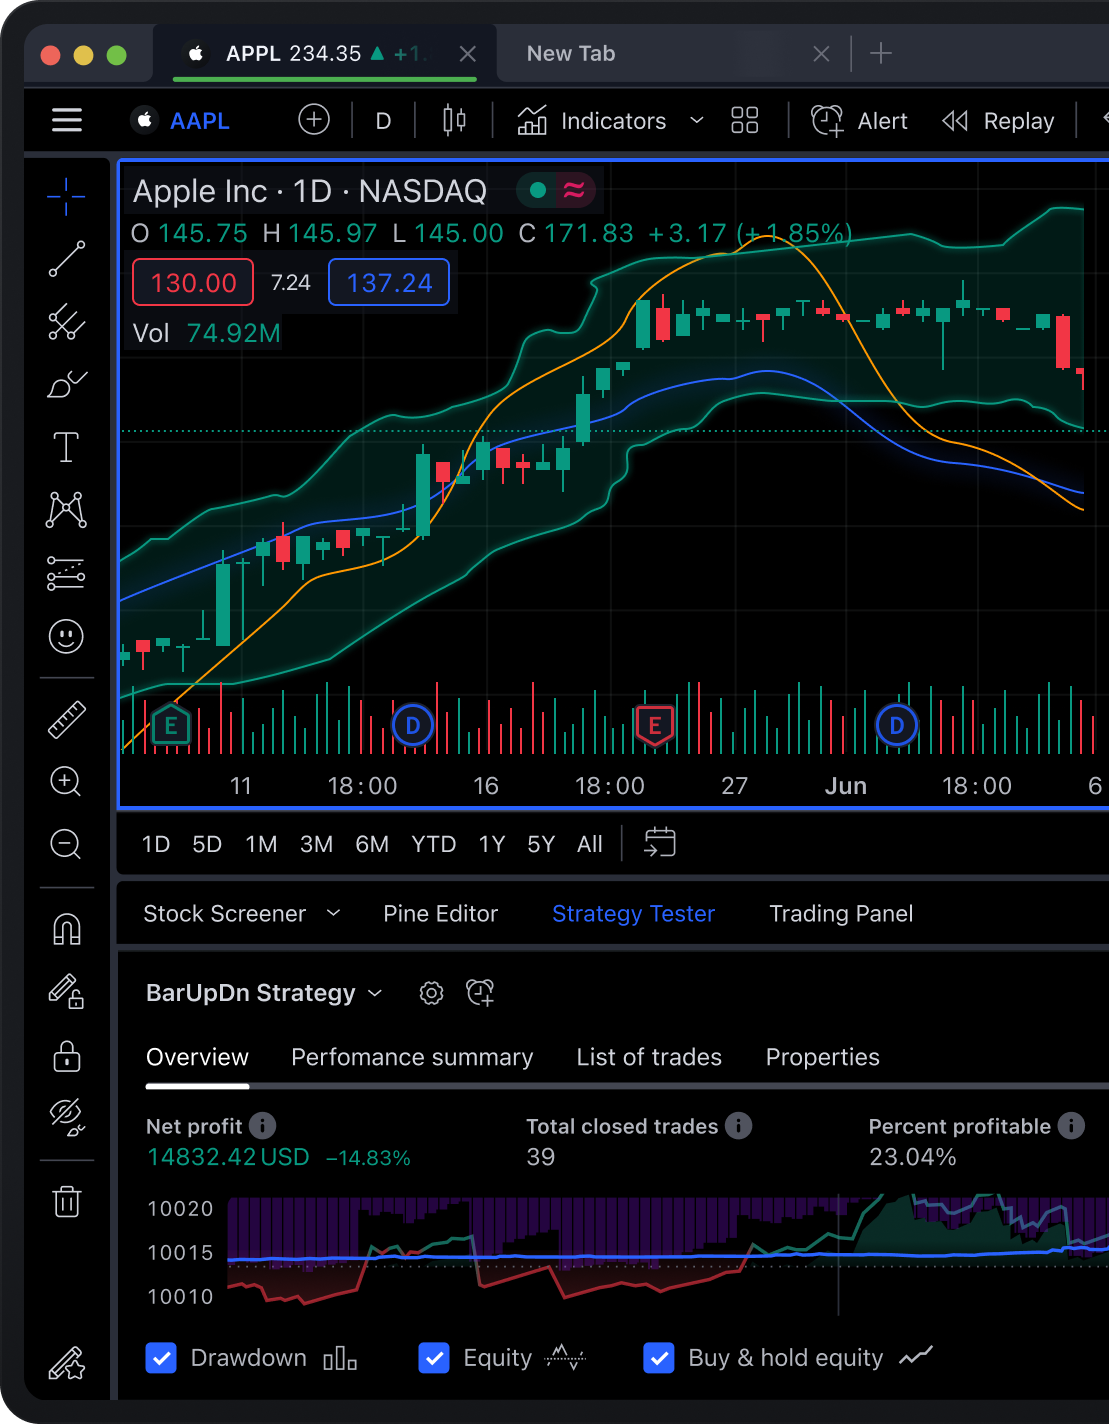 TradingView: Track All Markets for PC - Windows 7,8,10,11